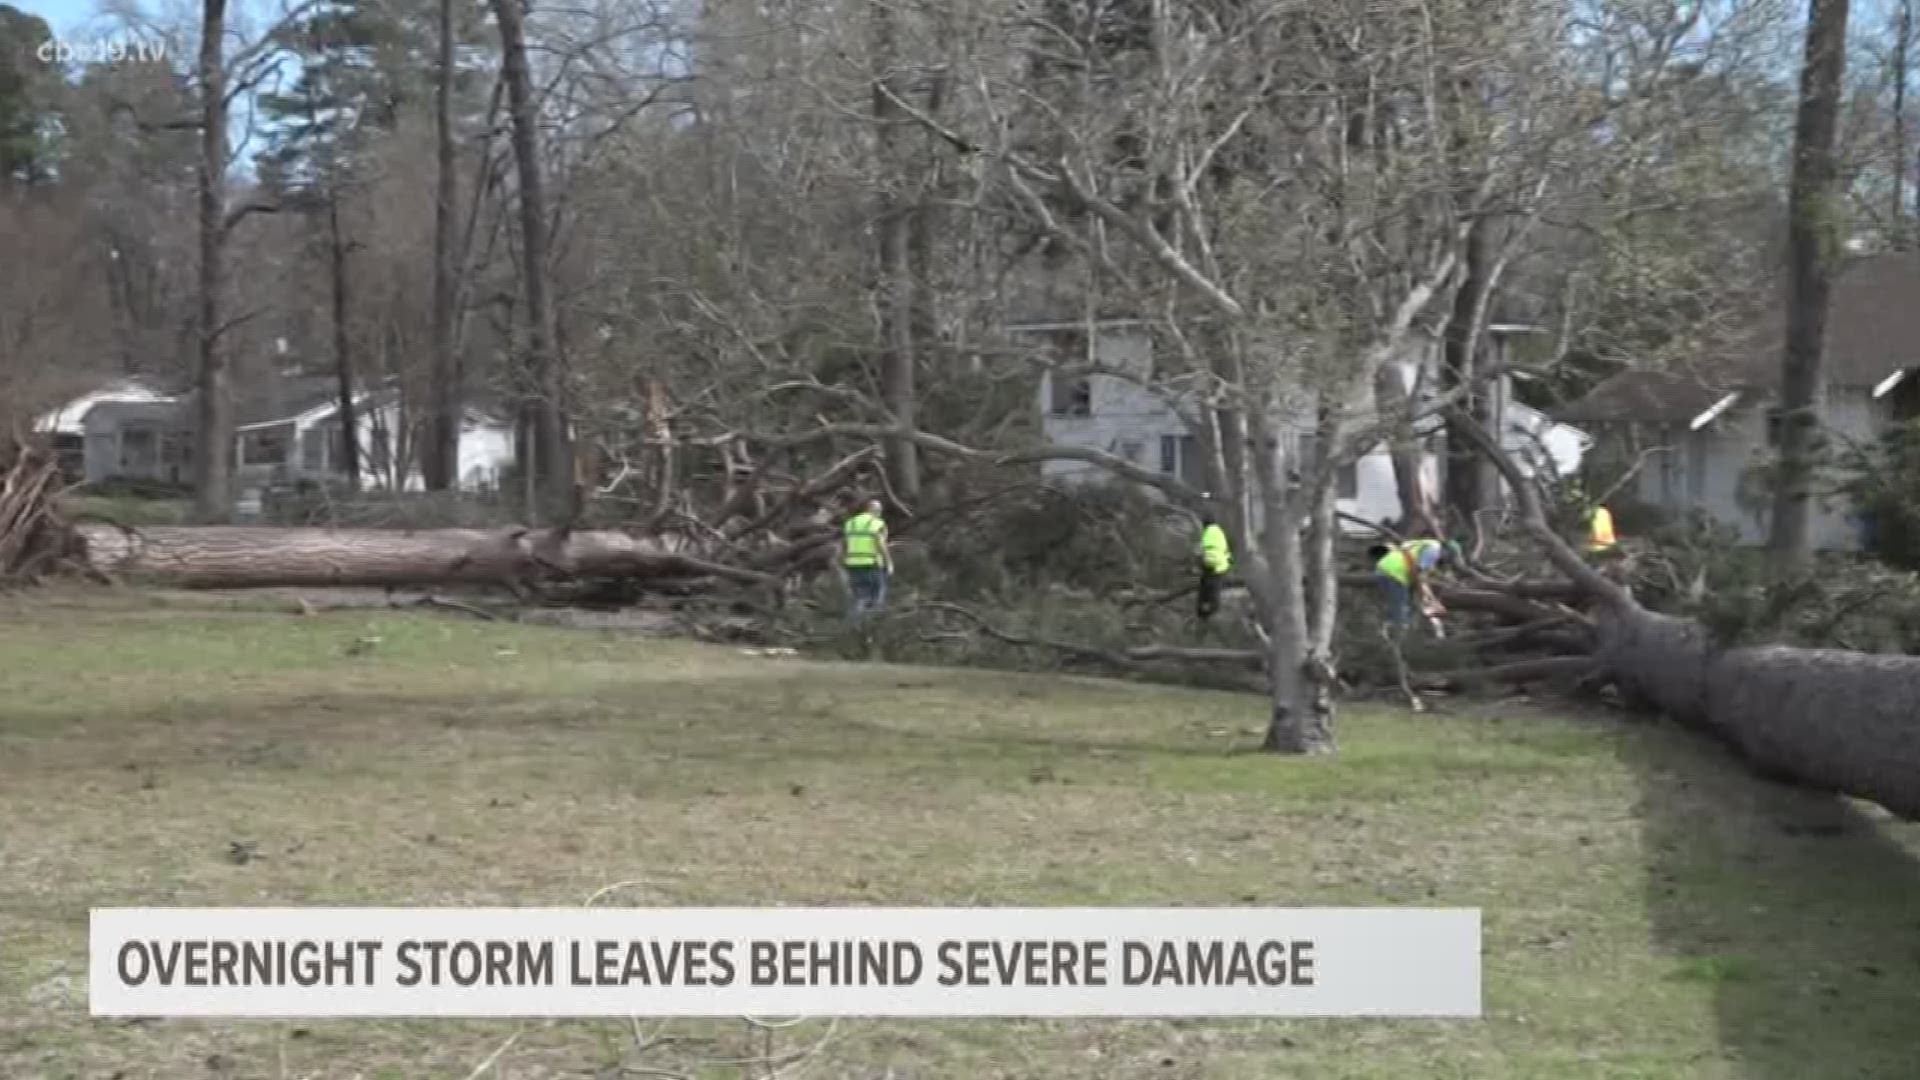 Strong storms moved through East Texas in the early morning hours of Thursday with thousands of homes damaged in the Kilgore area.